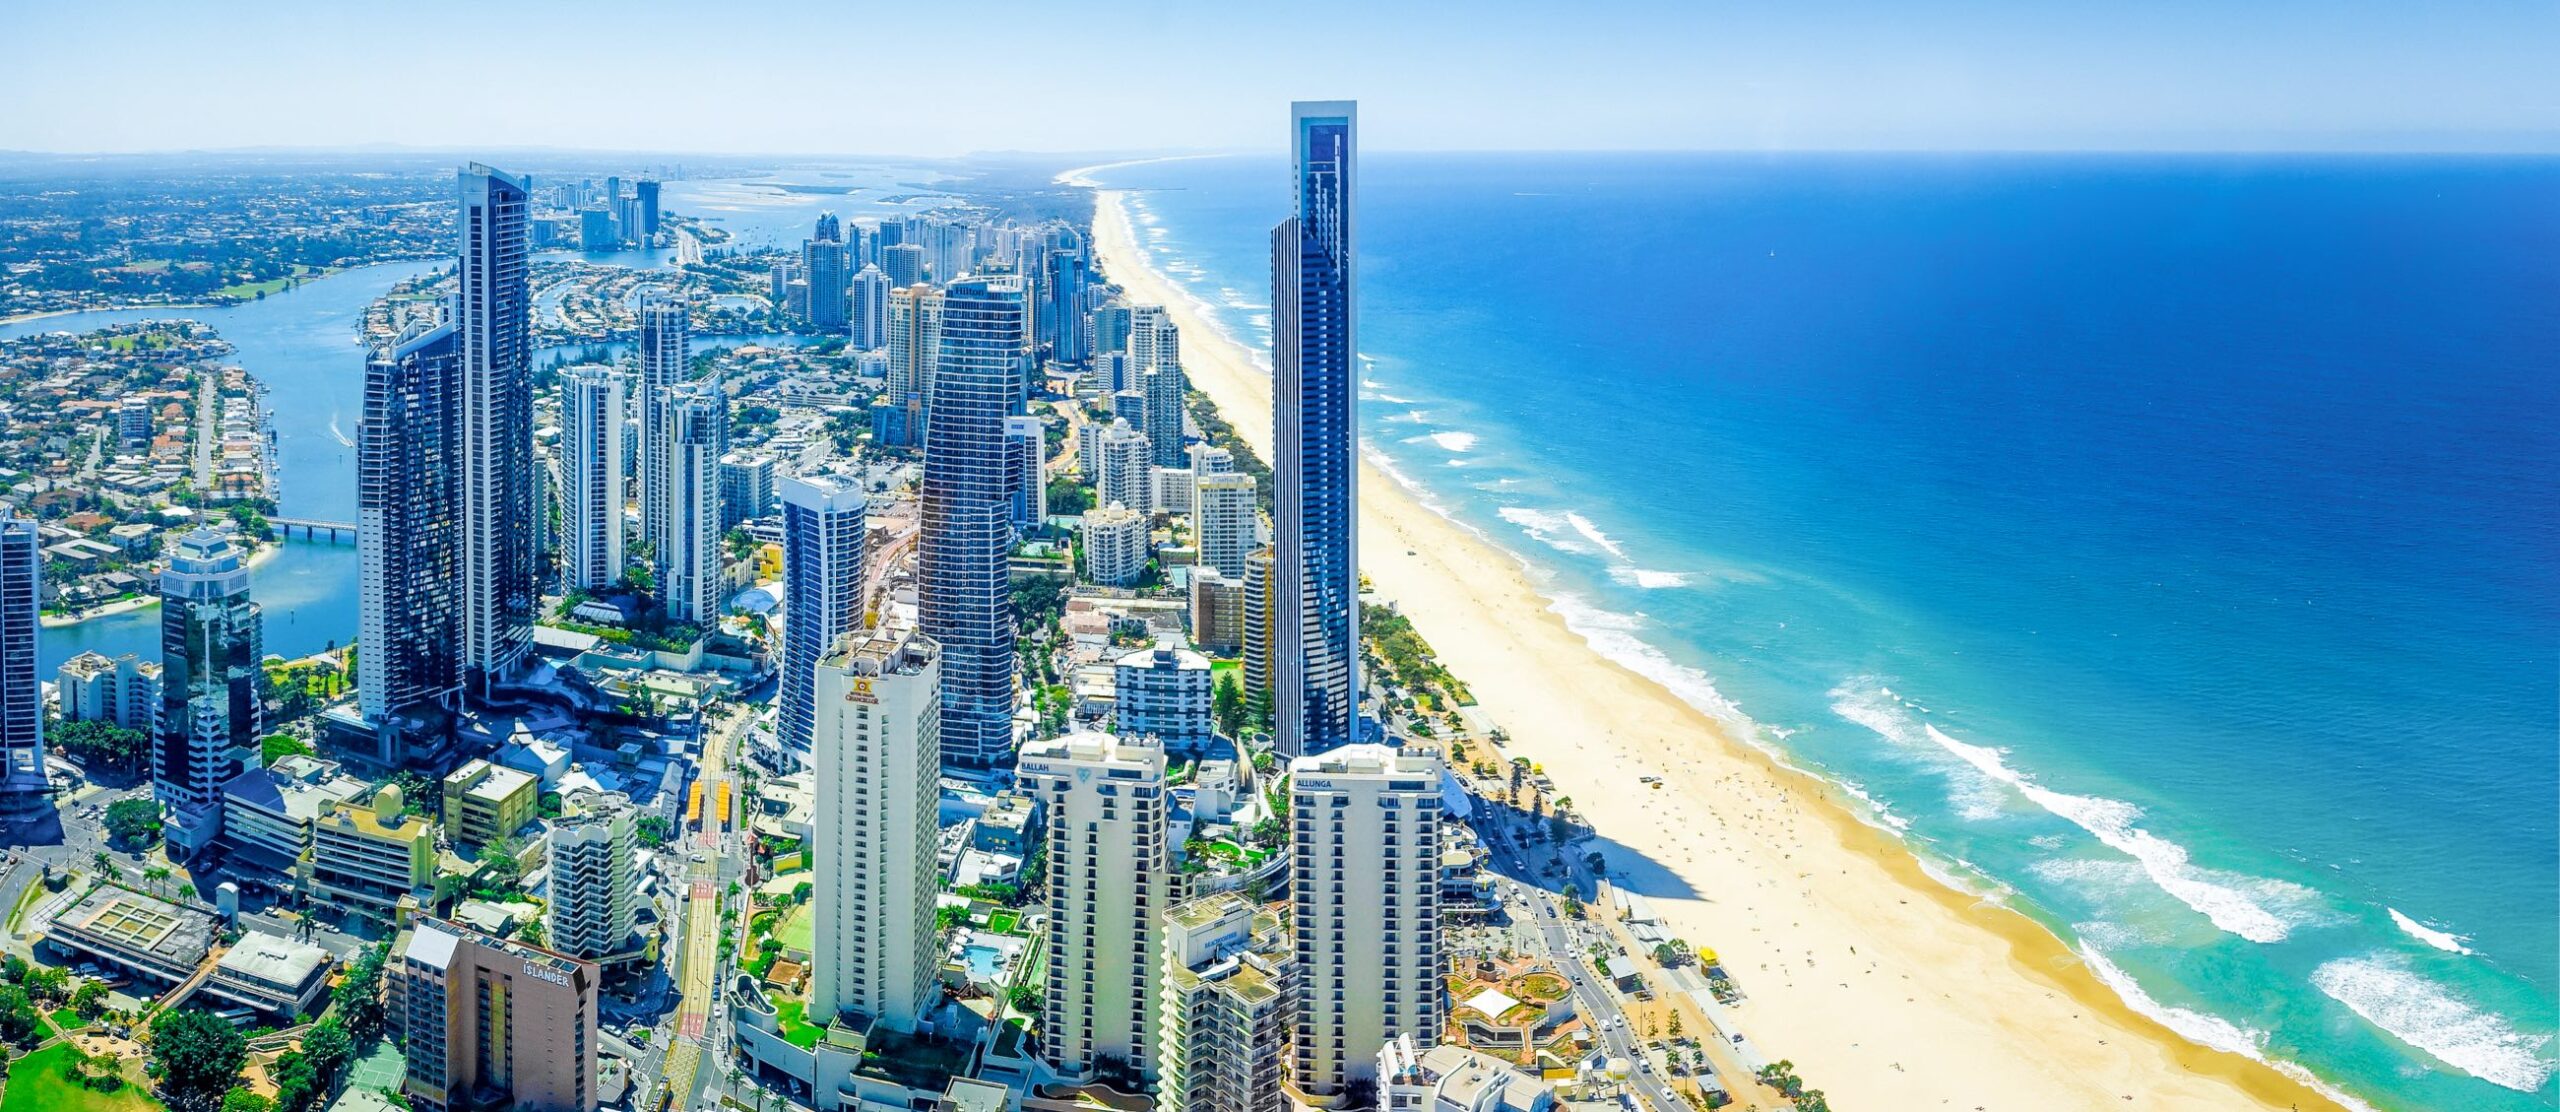 Best Things to Do at The Gold Coast – Sunshine, the Surf and Sea